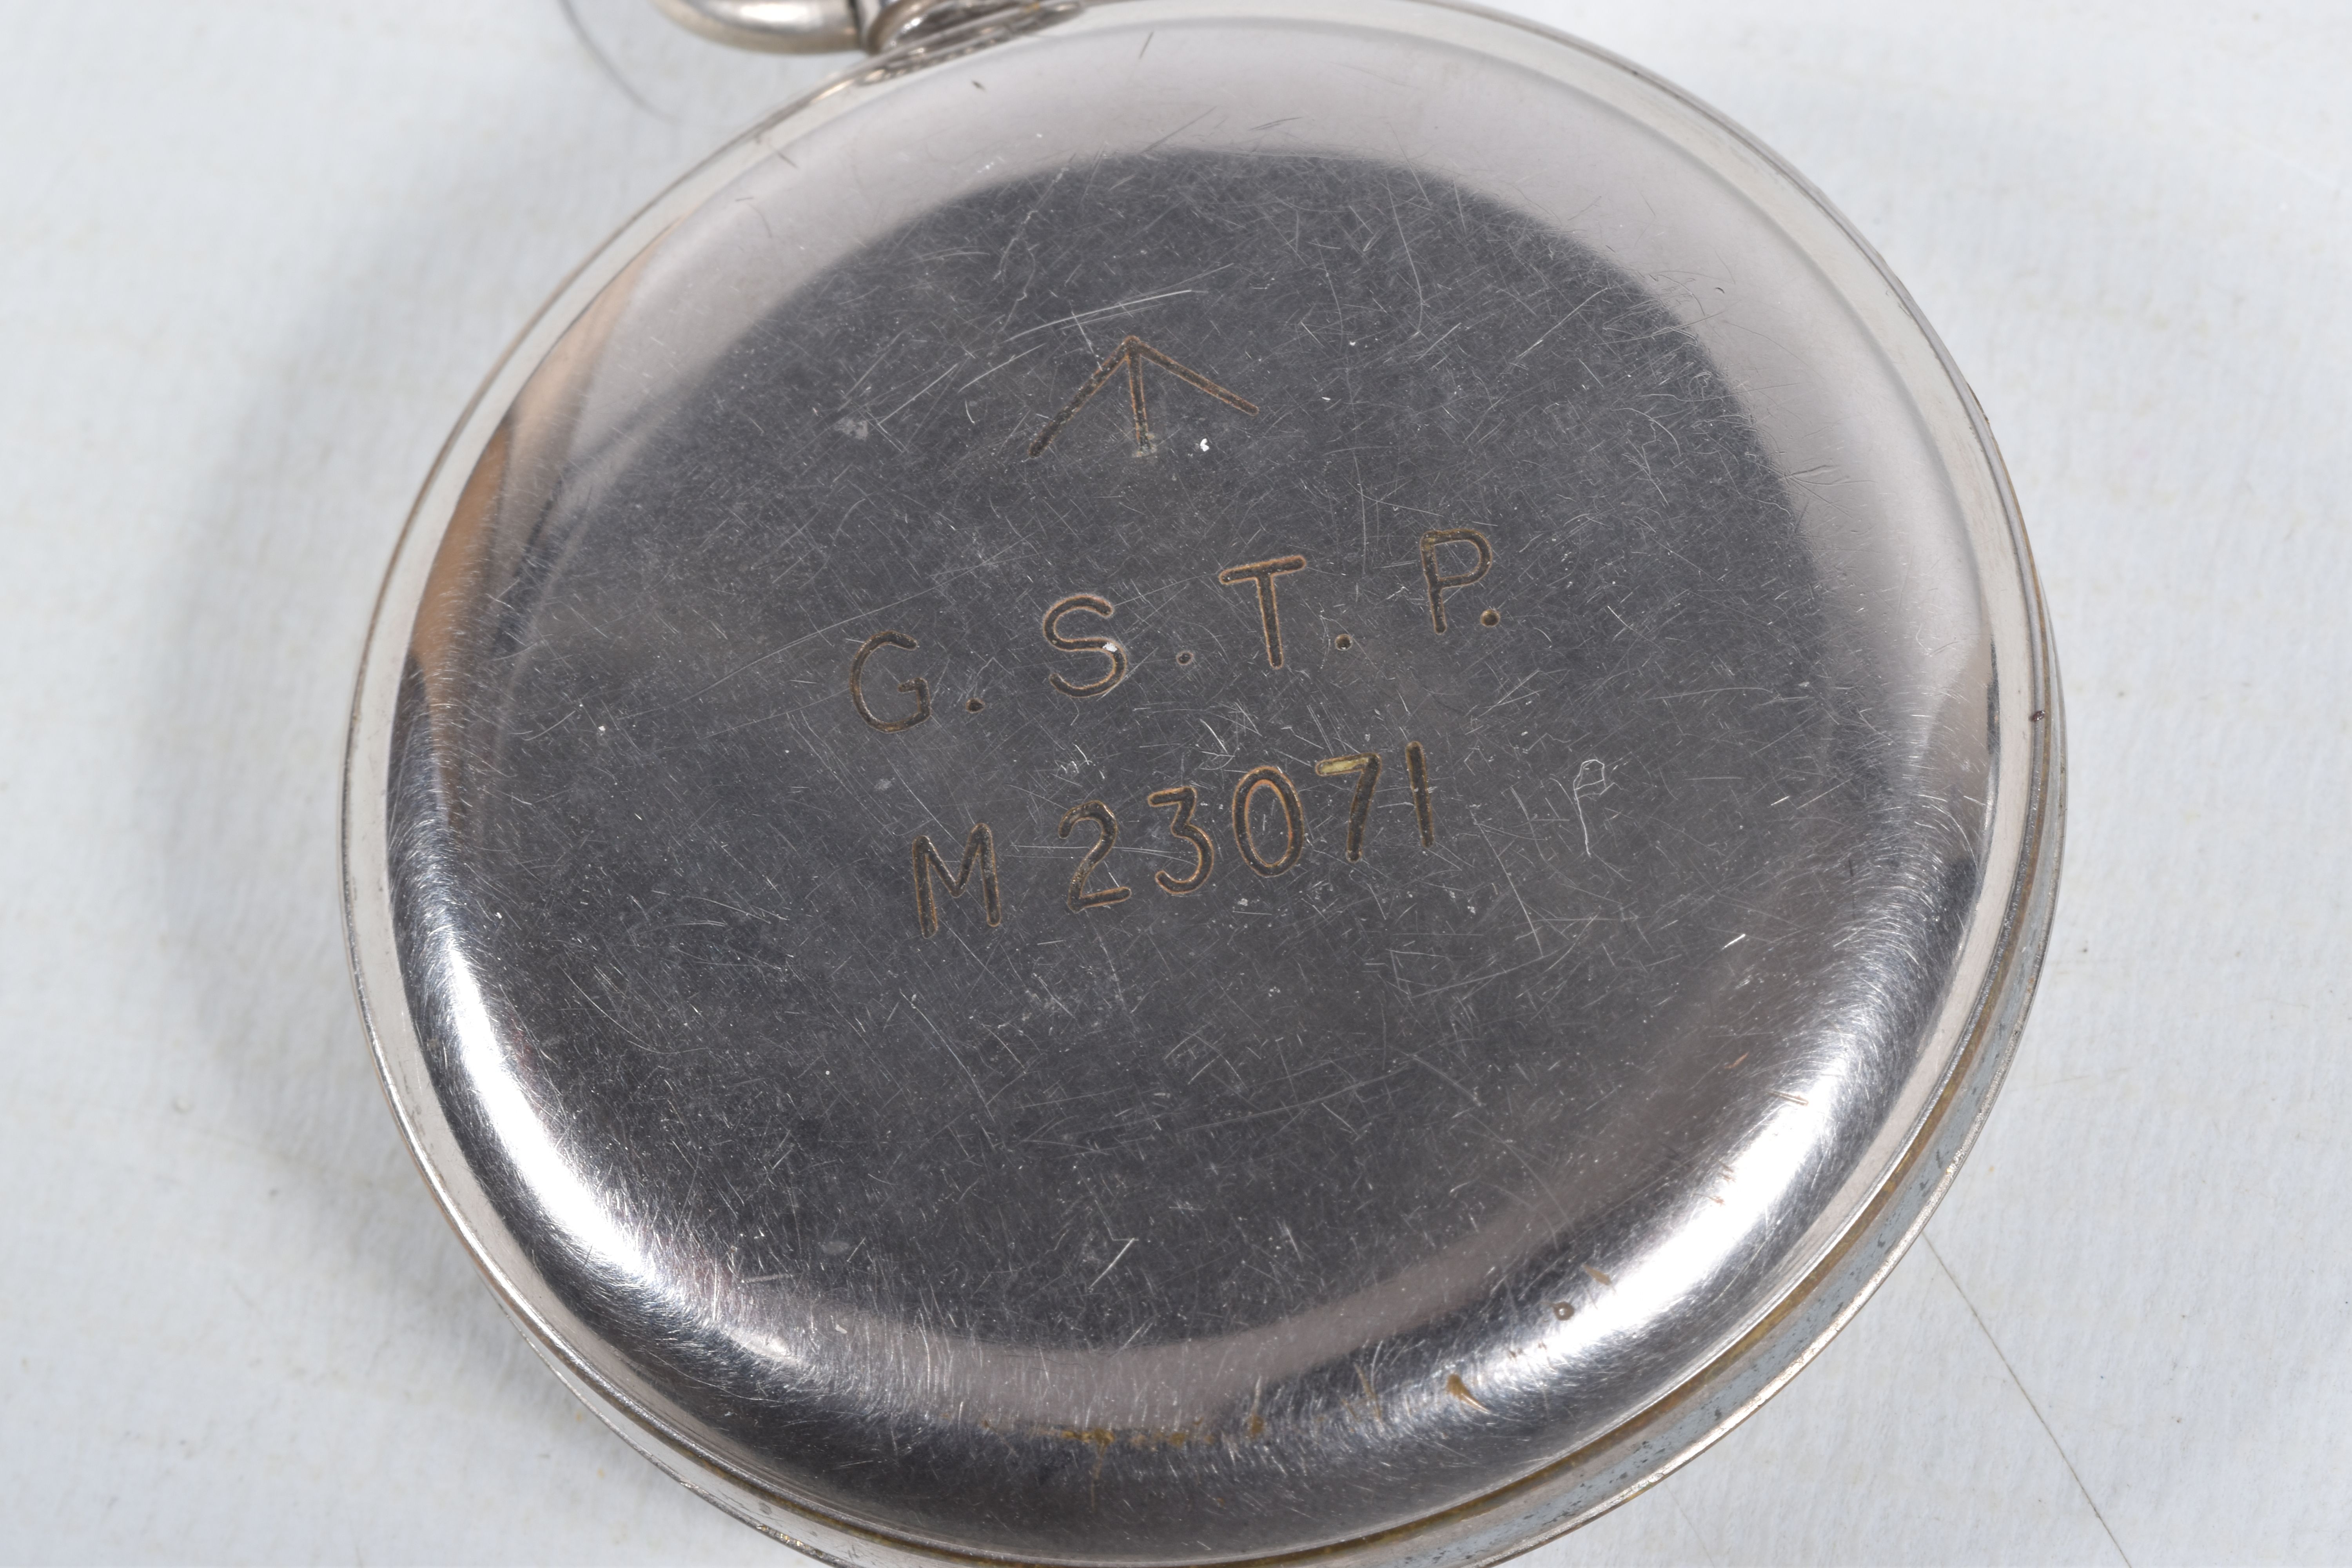 A MILITARY 'MOERIS' OPEN FACE POCKET WATCH, manual wind, round black dial signed 'Moeris', Arabic - Image 4 of 6